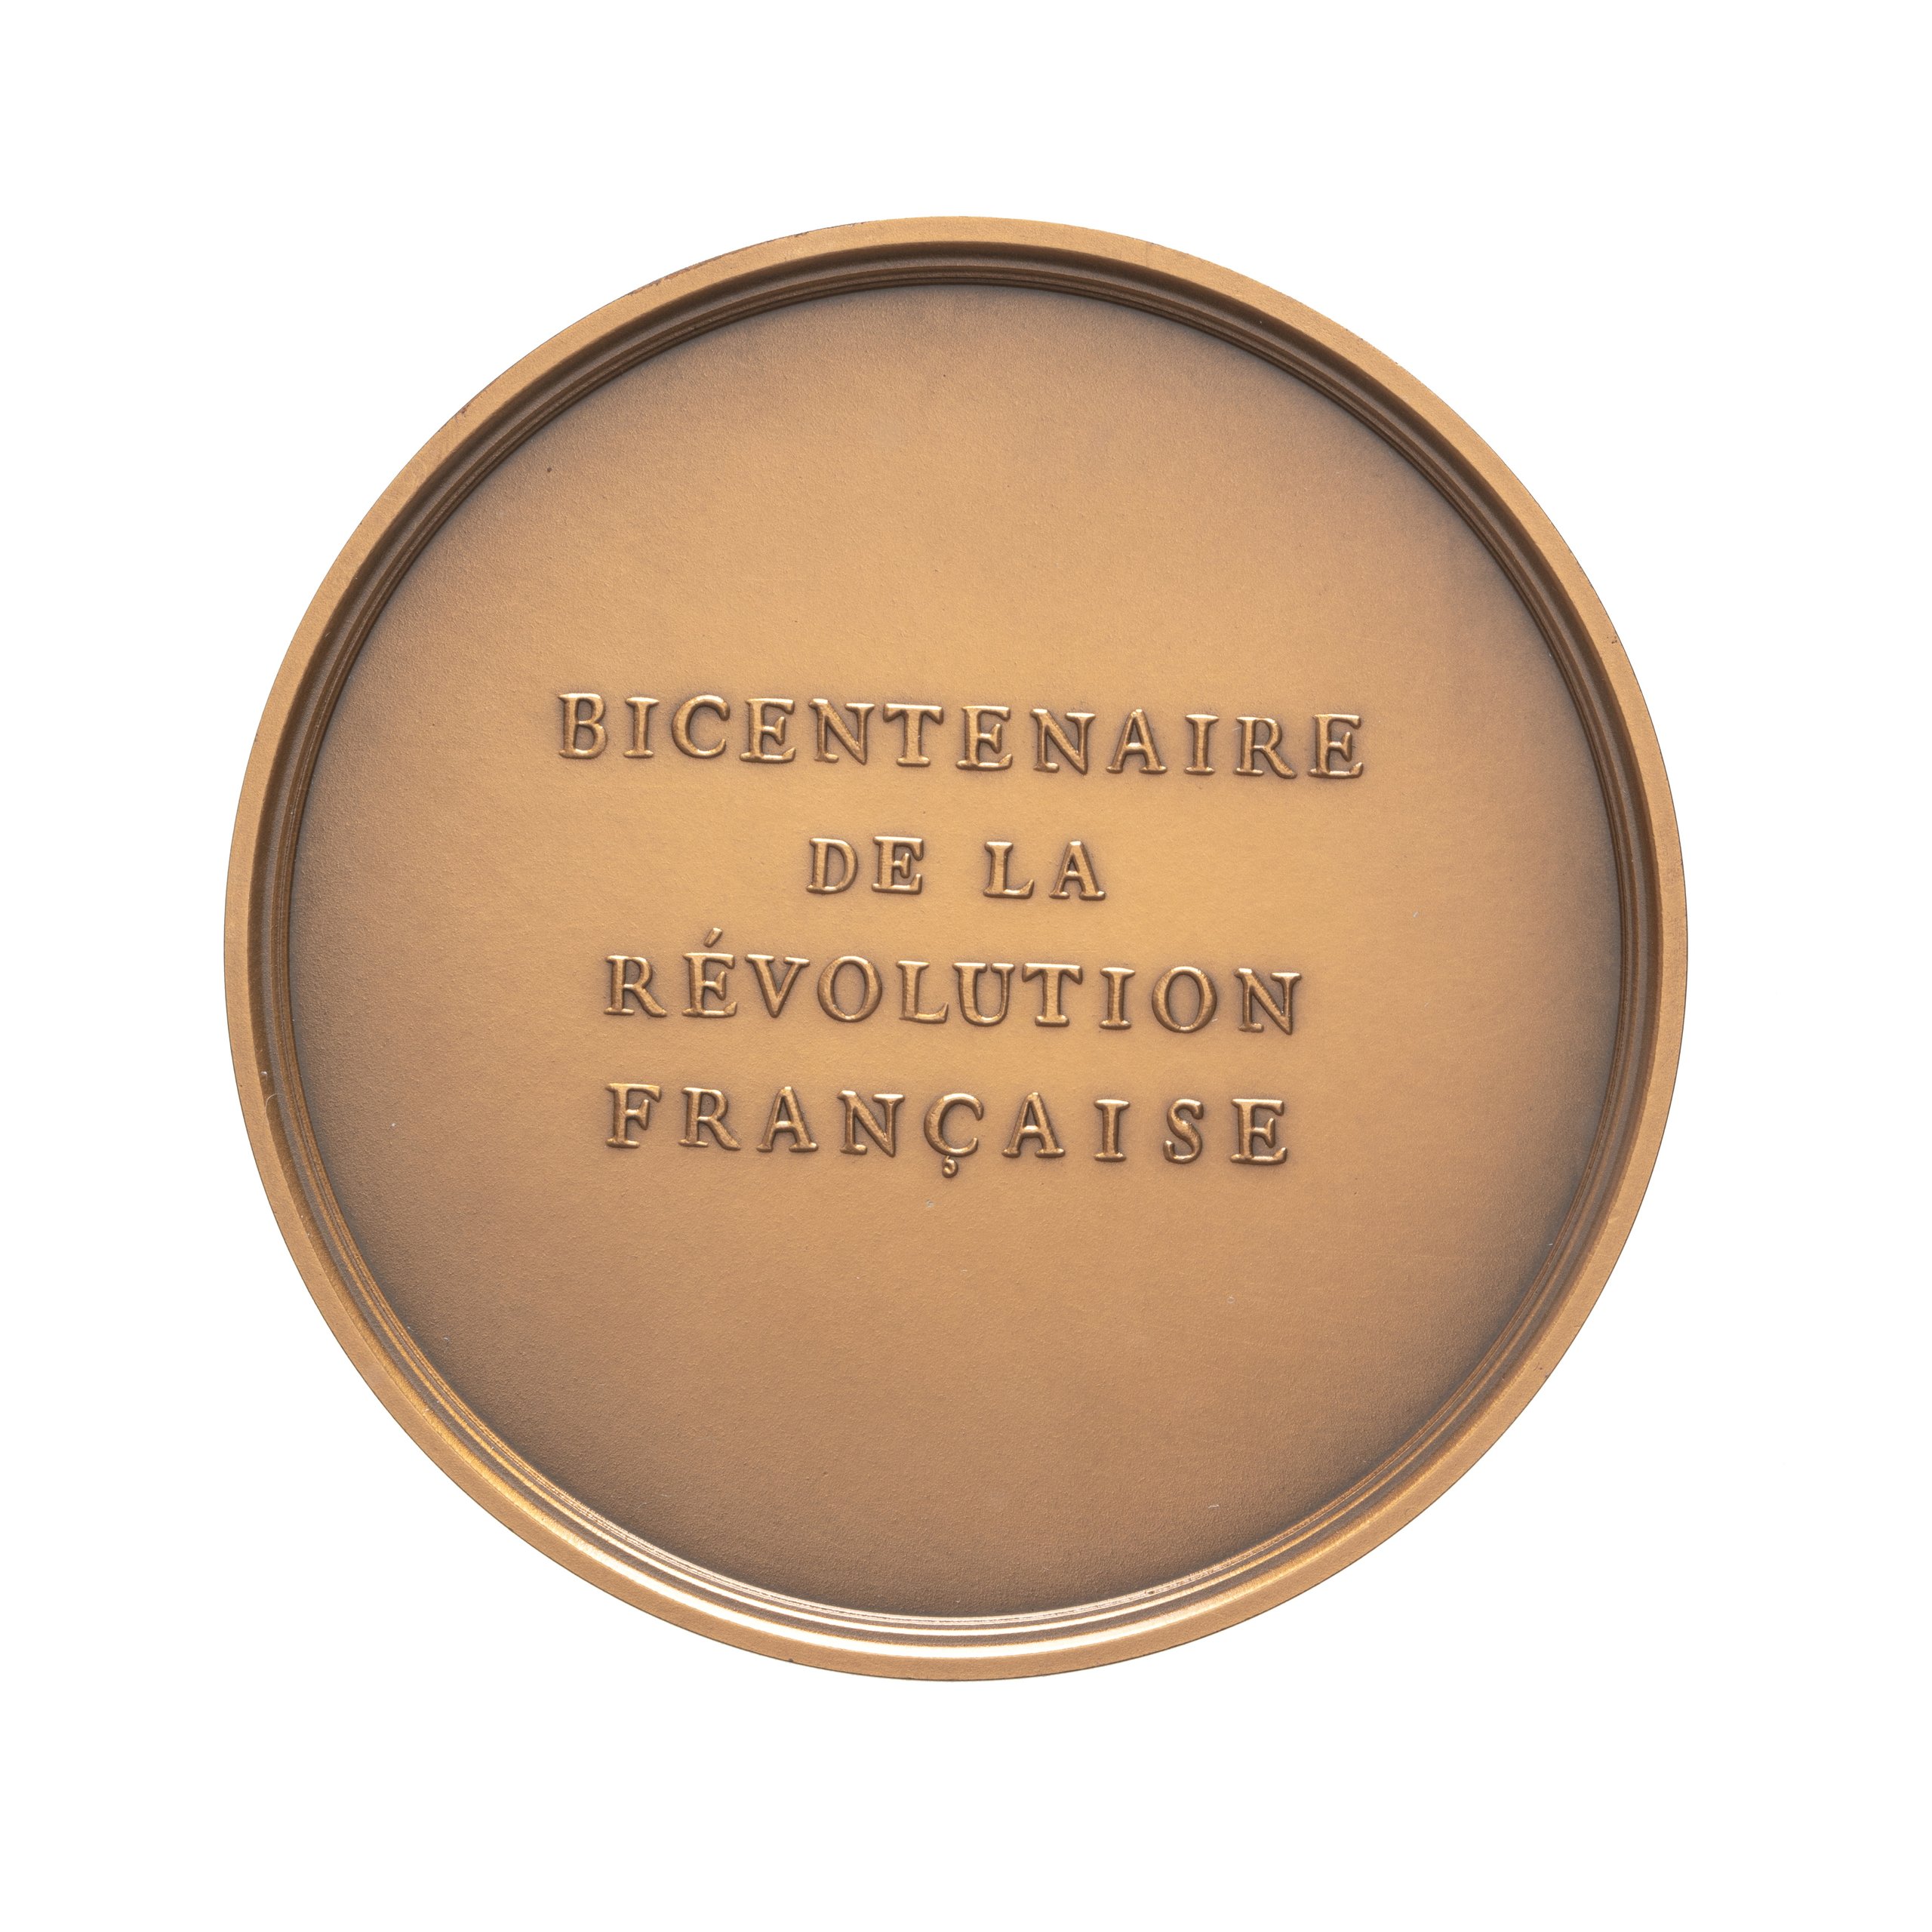 Medallion with case commemorating French Revolution bicentenary